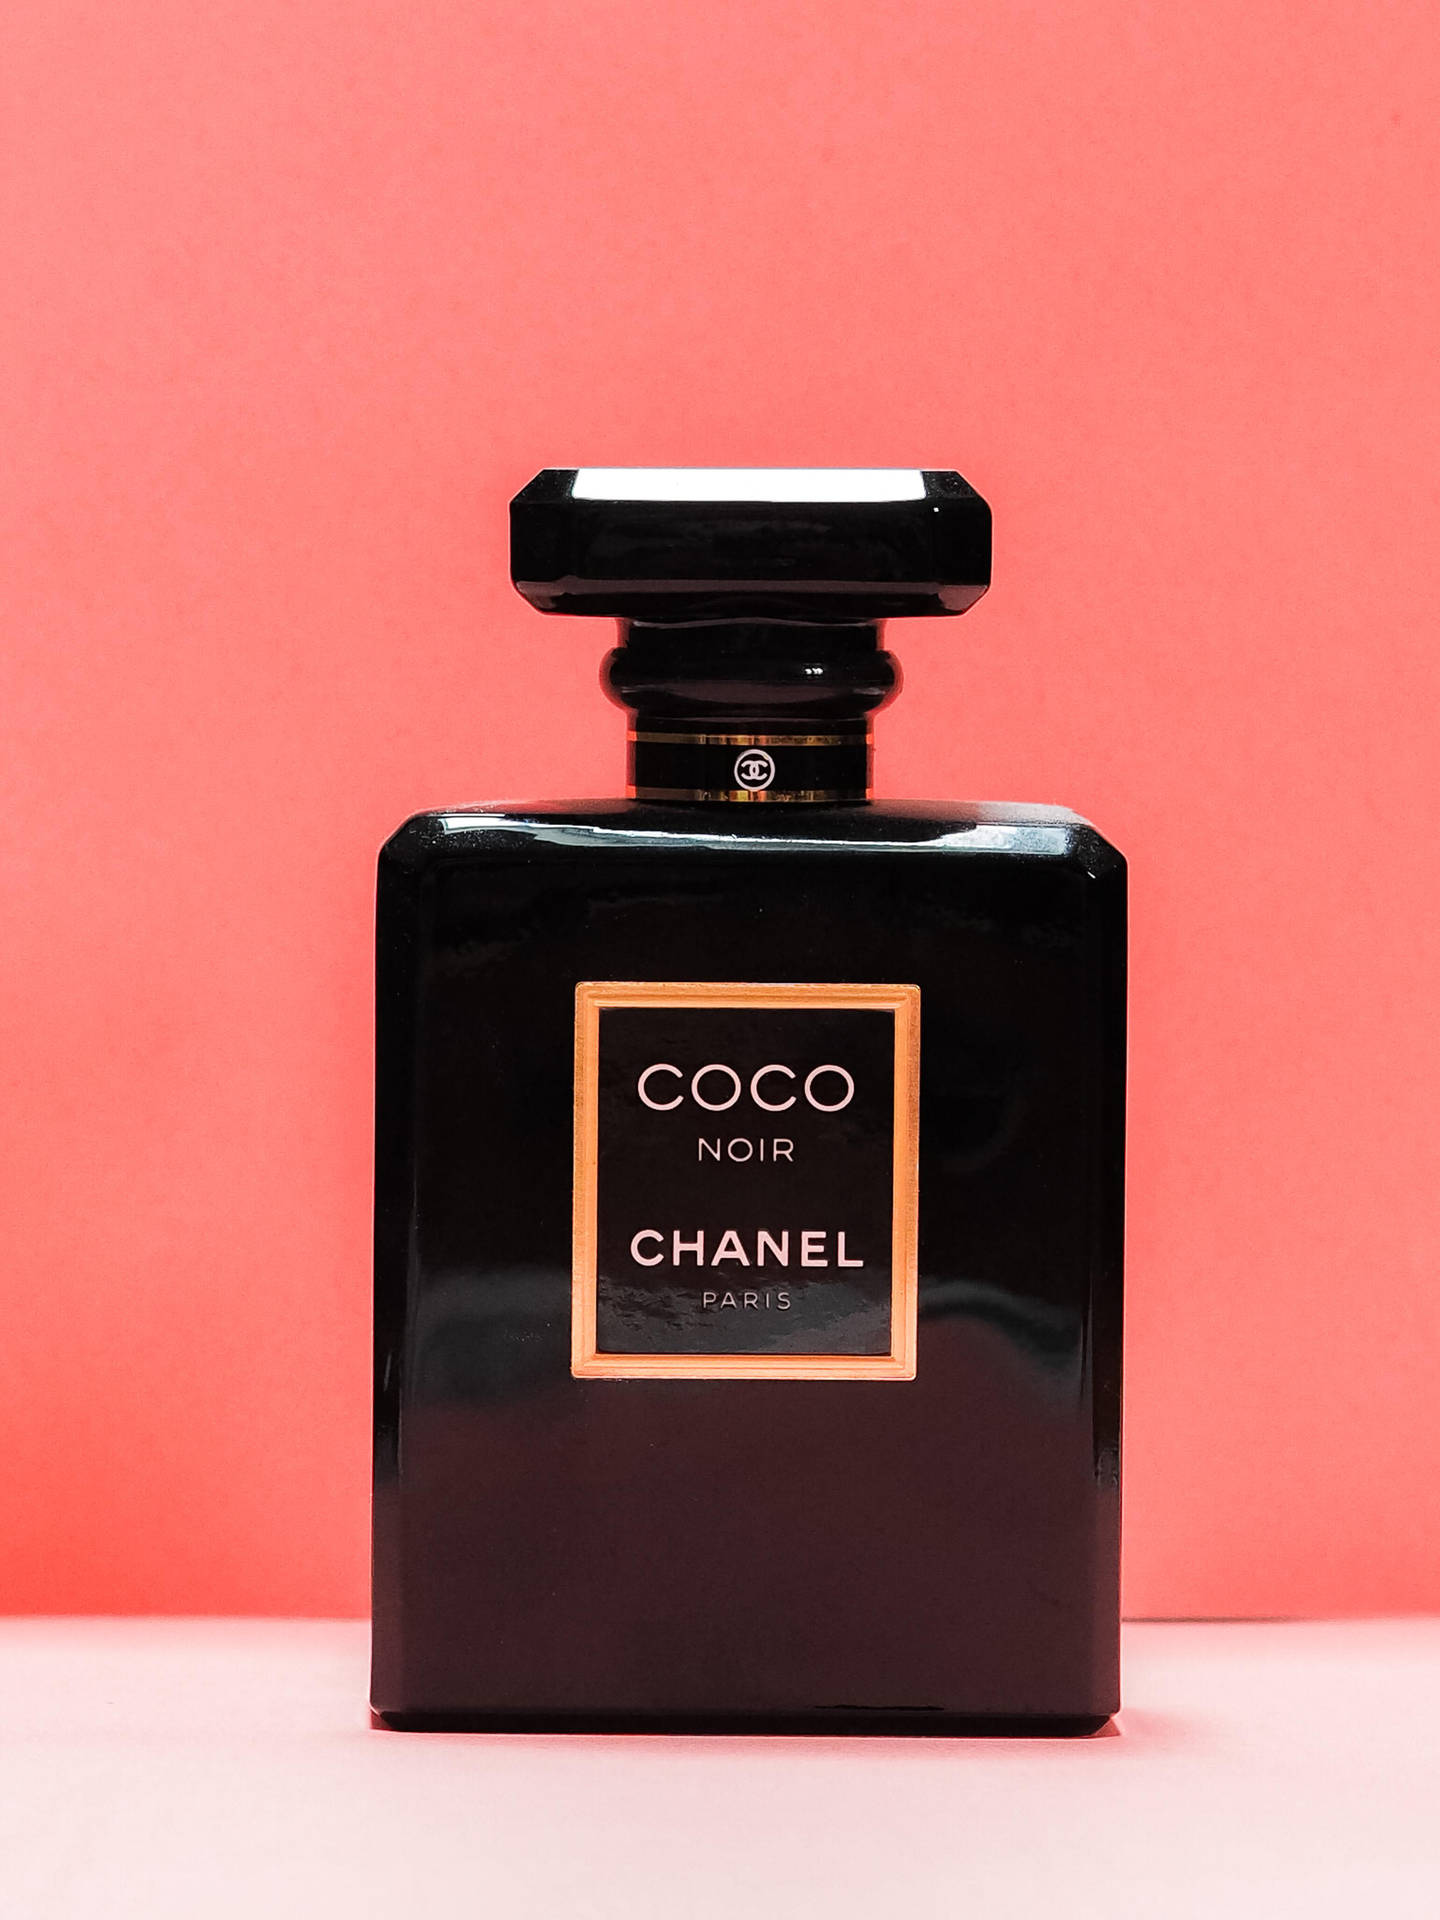 Coco Noir Chanel Pink Aesthetic